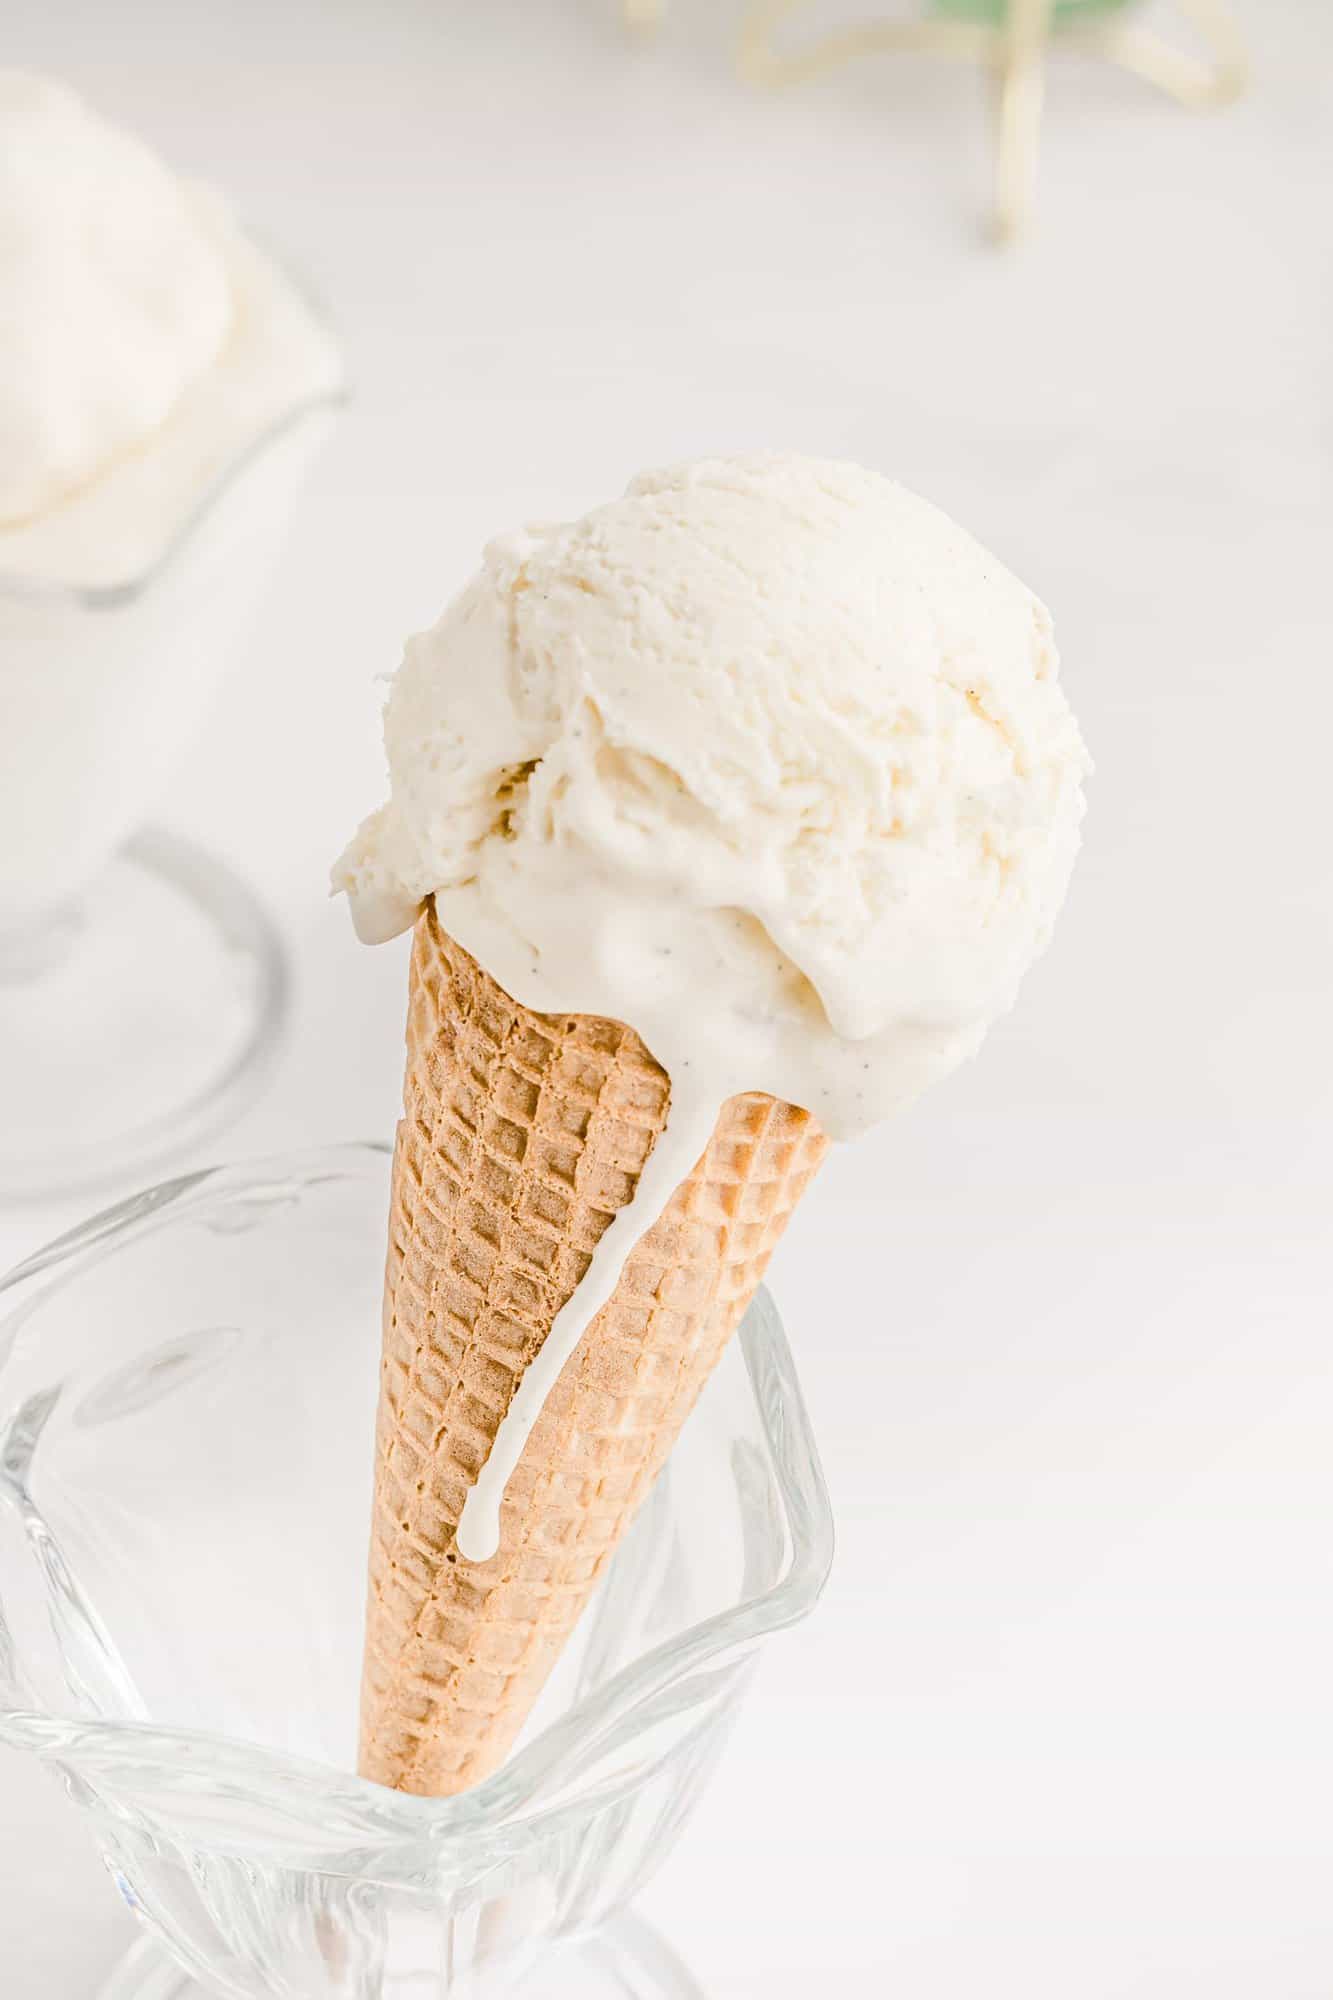 A scoop of vanilla ice cream in a cone, with melted ice cream dripping down the side.